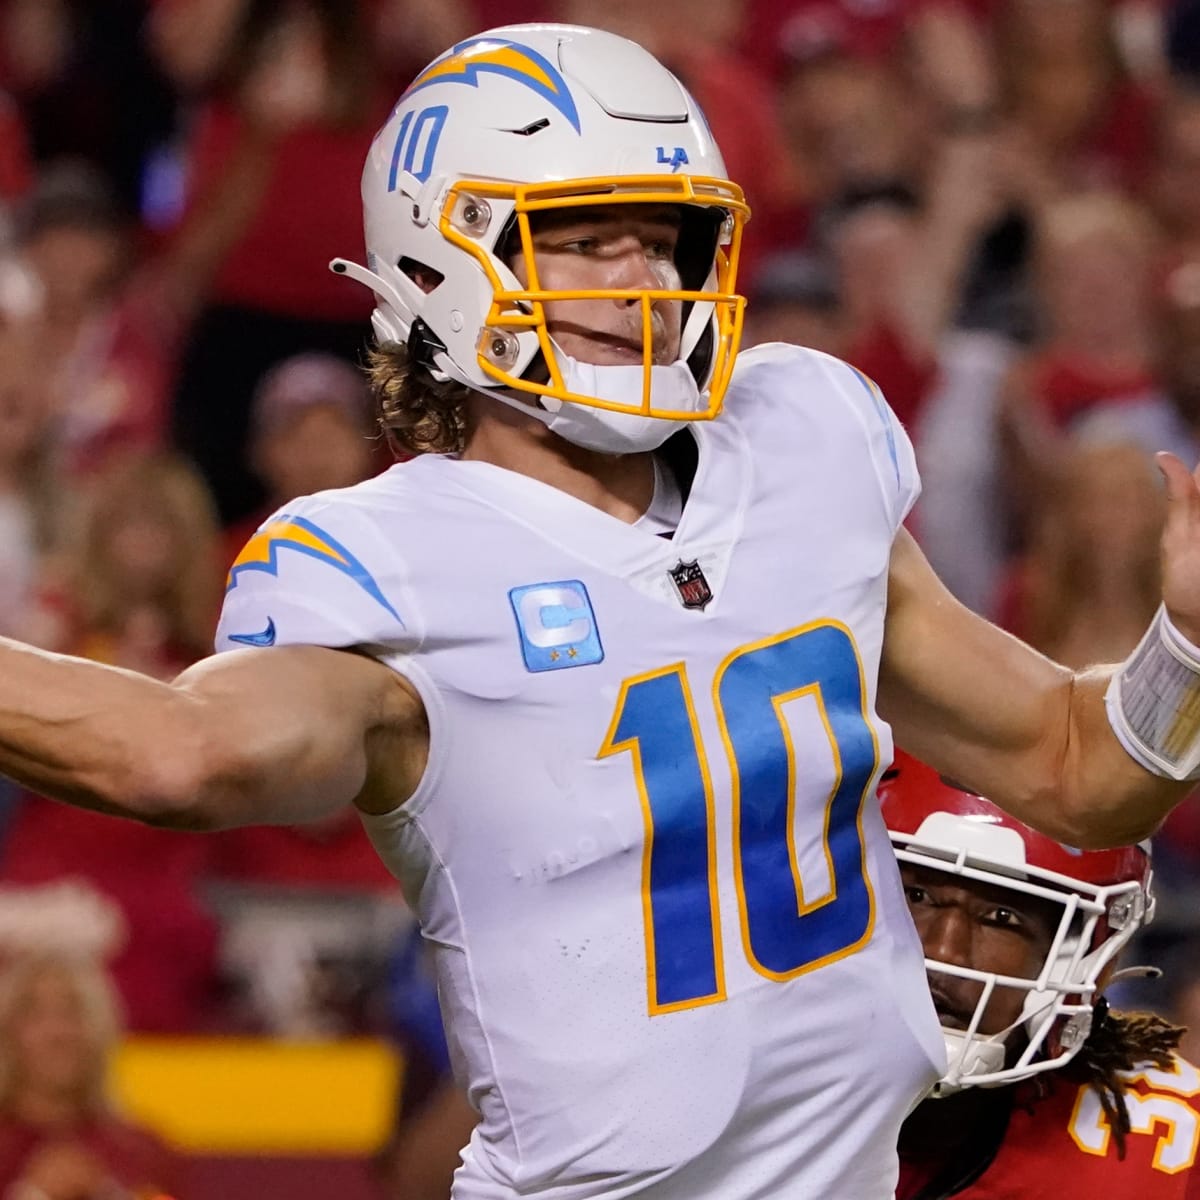 Pro Football Hall of Fame on X: .@Chargers QB Justin Herbert broke almost  every conceivable @NFL rookie passing record during the 2020 season. On  display in Canton is his game-worn jersey from